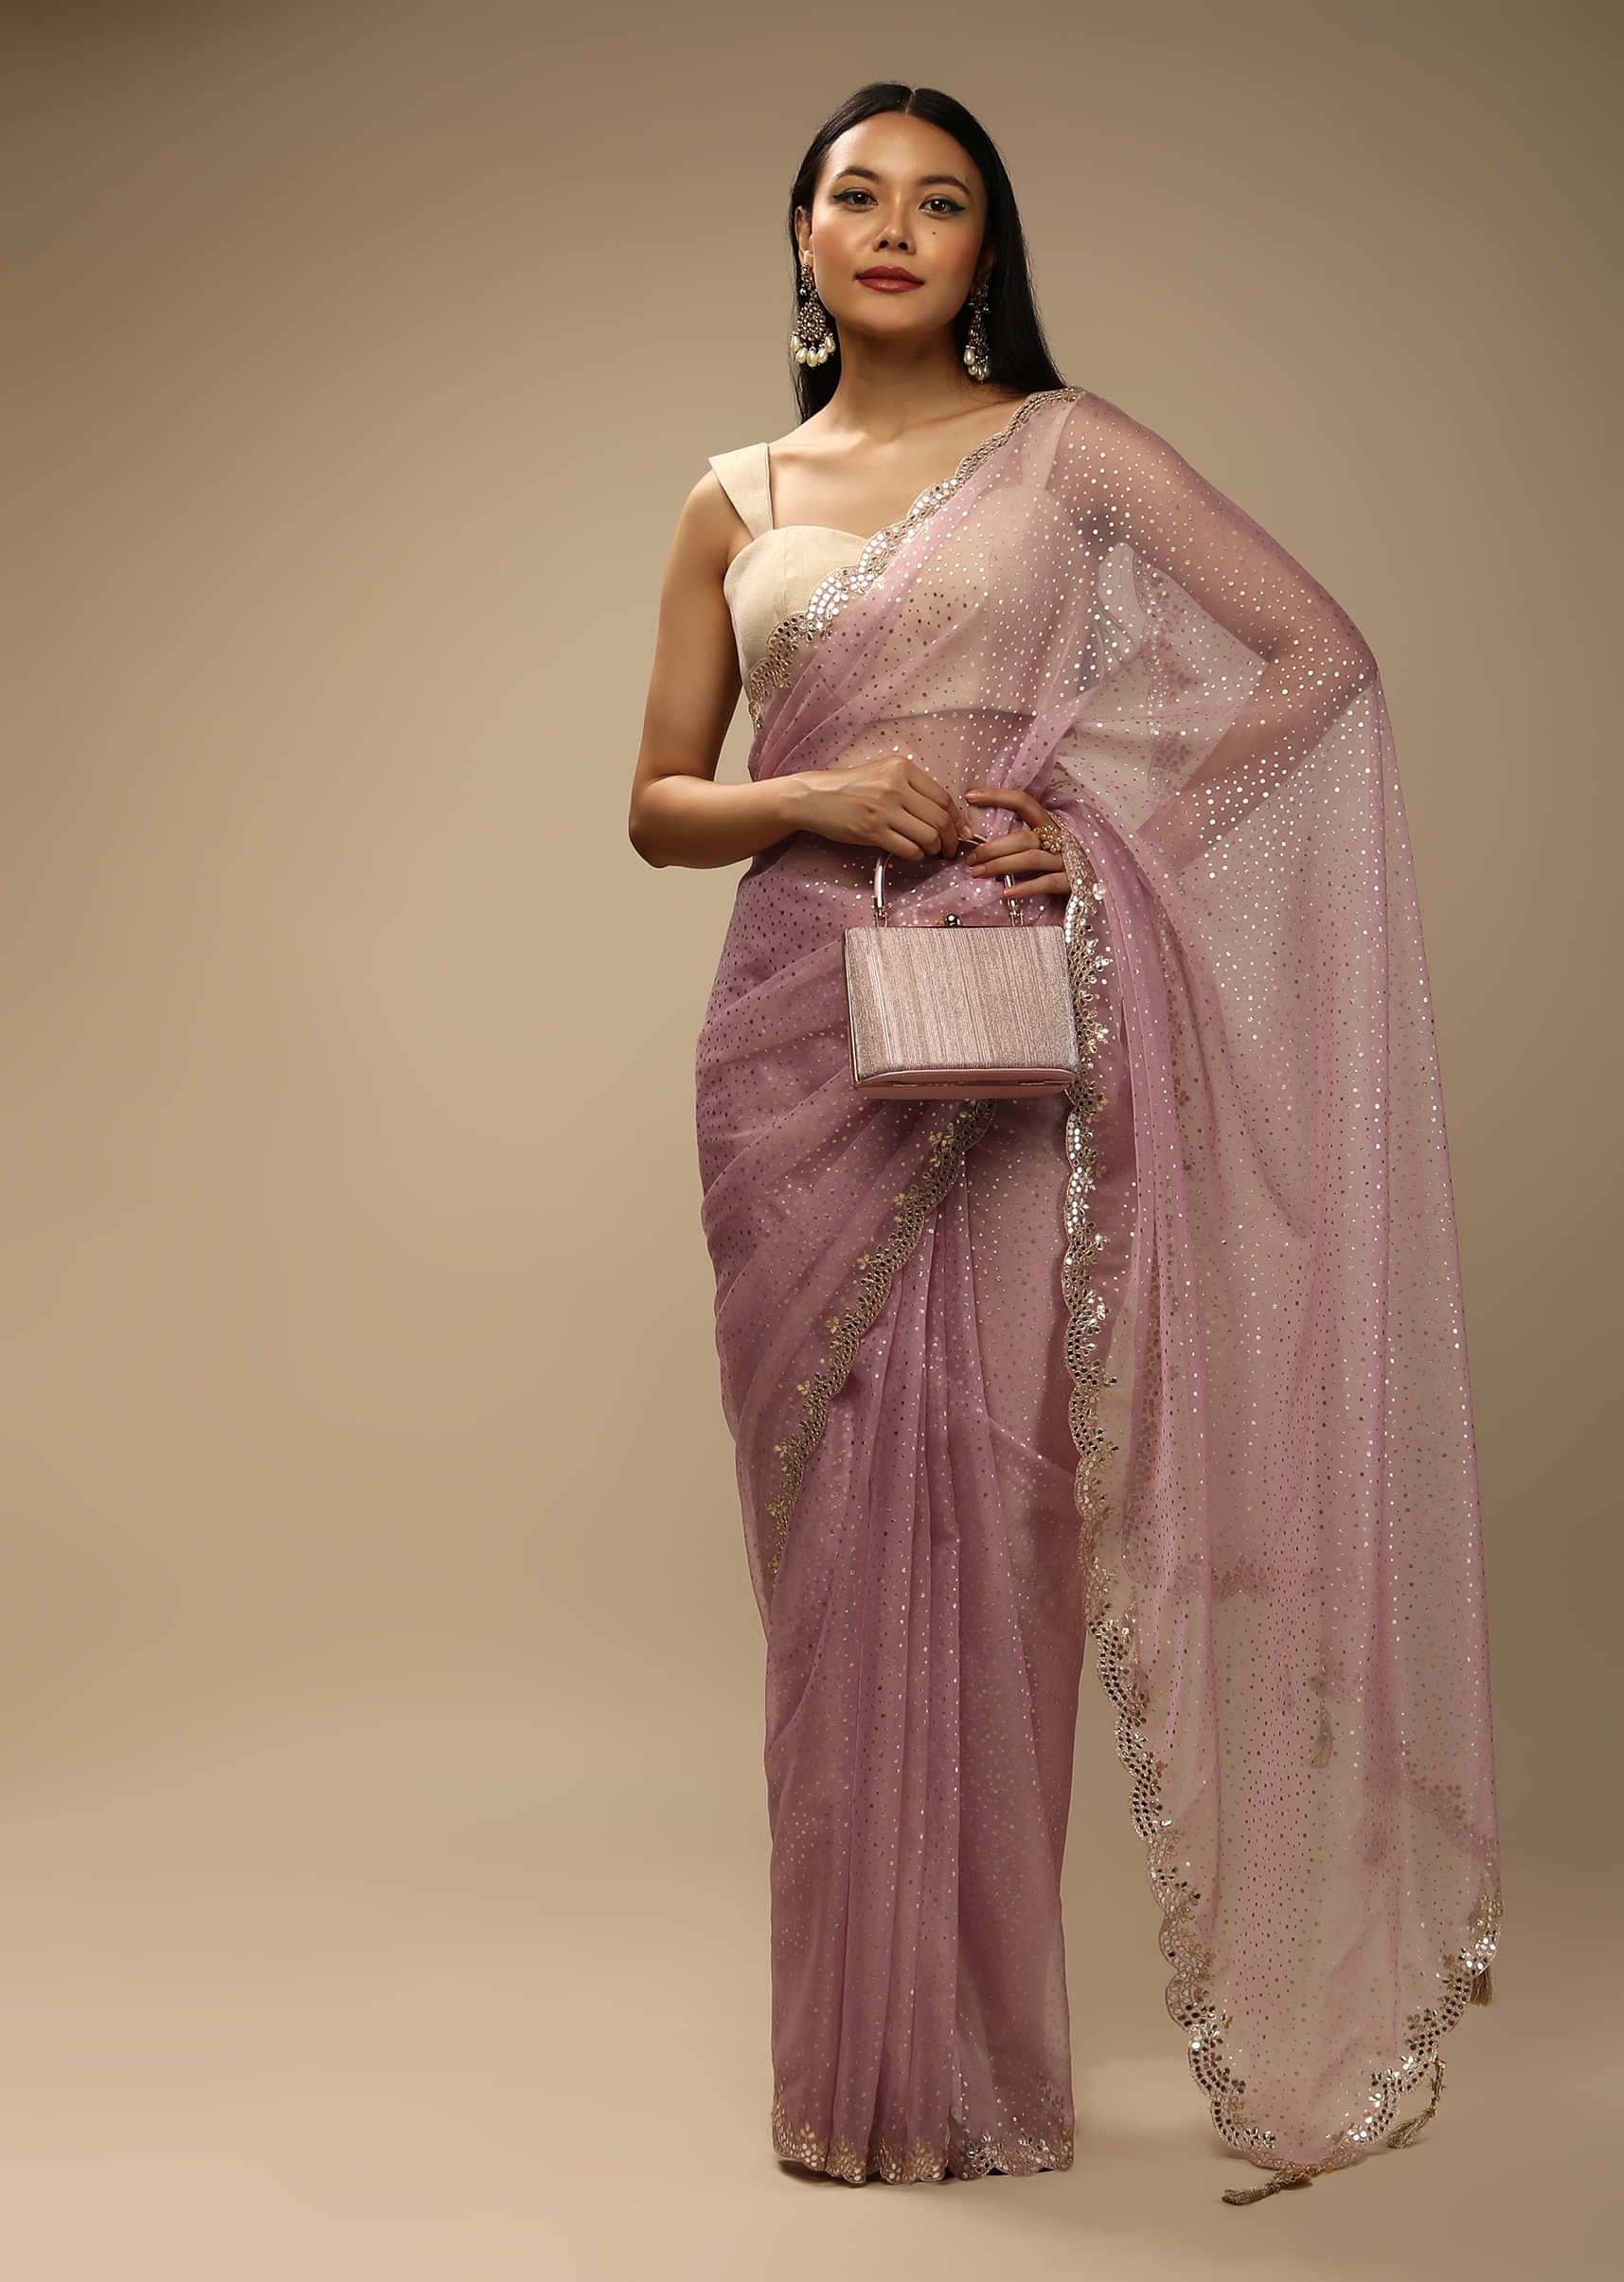 Zephyr Pink Saree In Organza With Foil Printed Scattered Dots And Mirror Embroidered Scallop Border